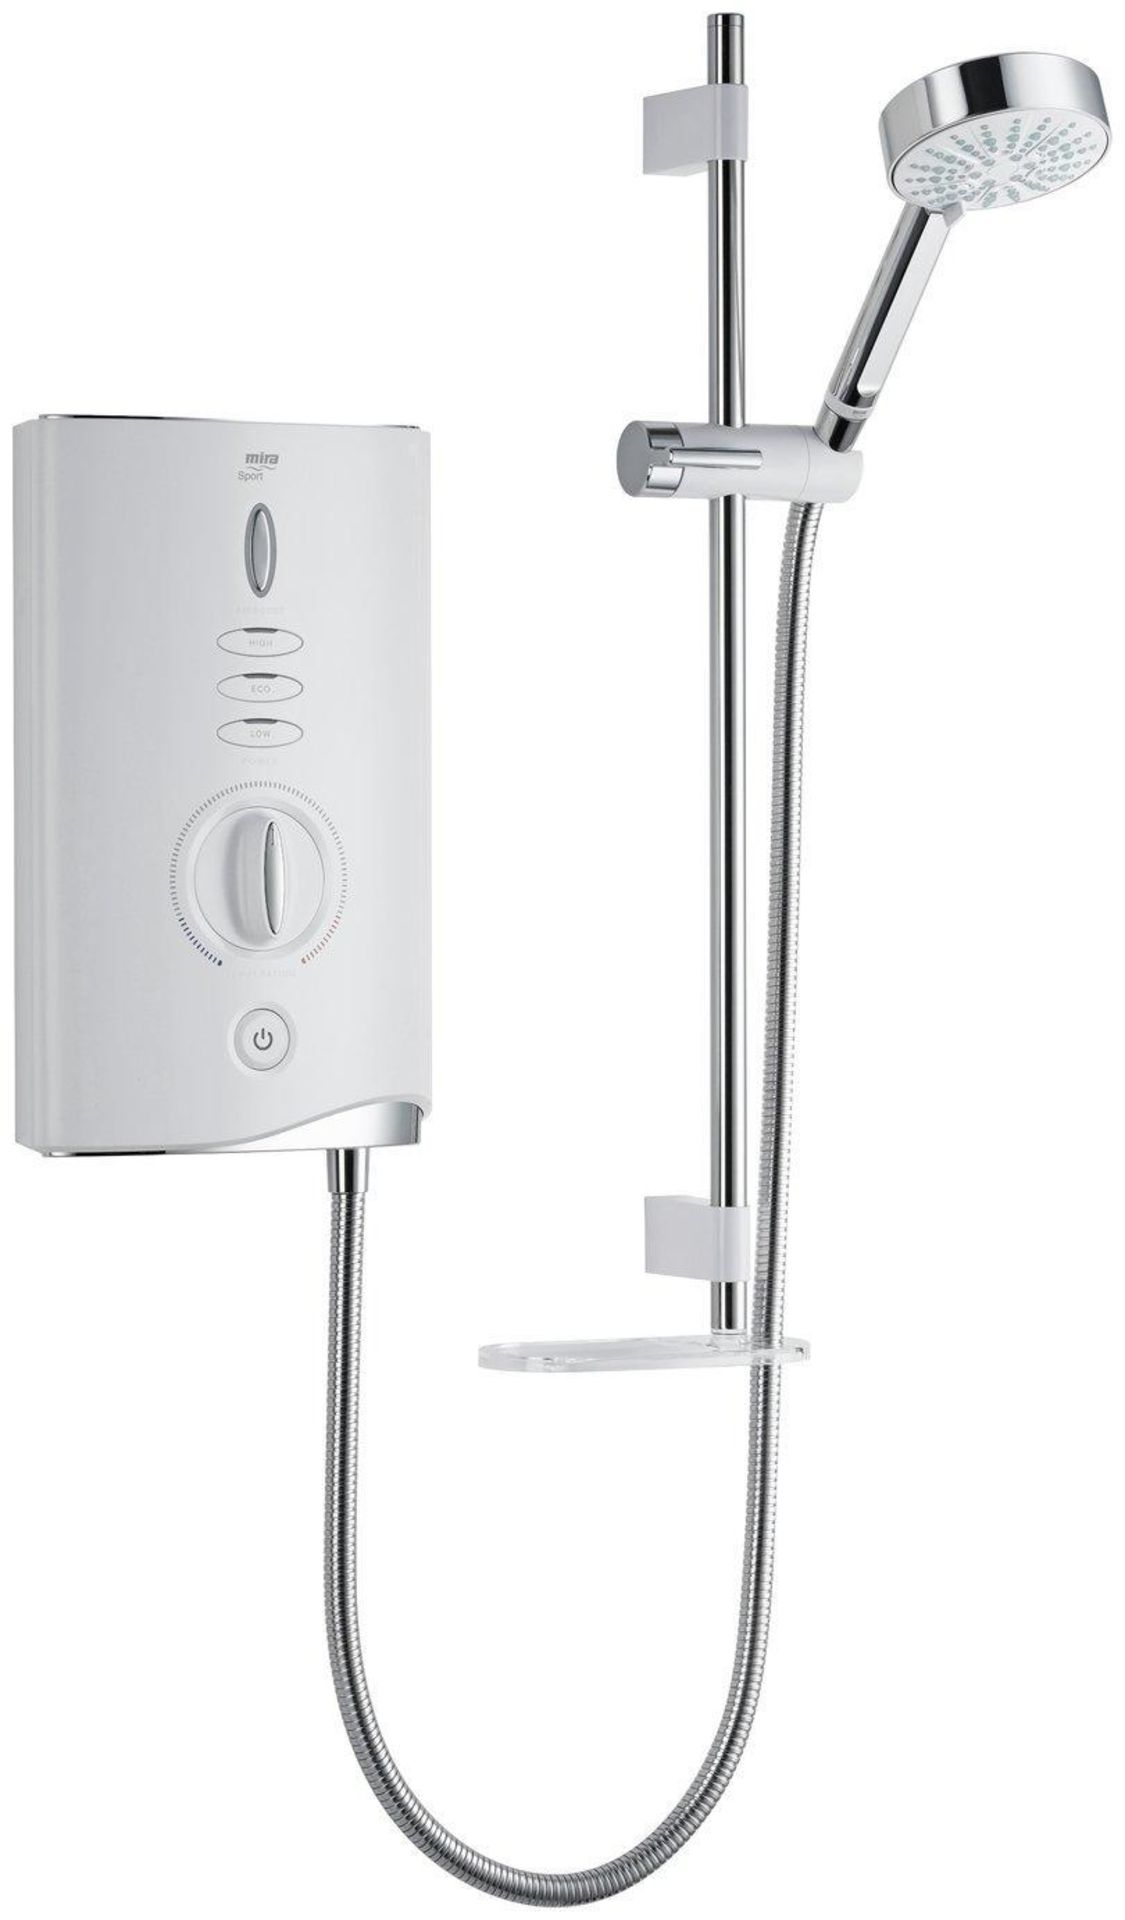 Mira Sport Max 9.0 KW Electric Shower White and Chrome with Airboost 1.1746.007 - SR4. Mira Sport is